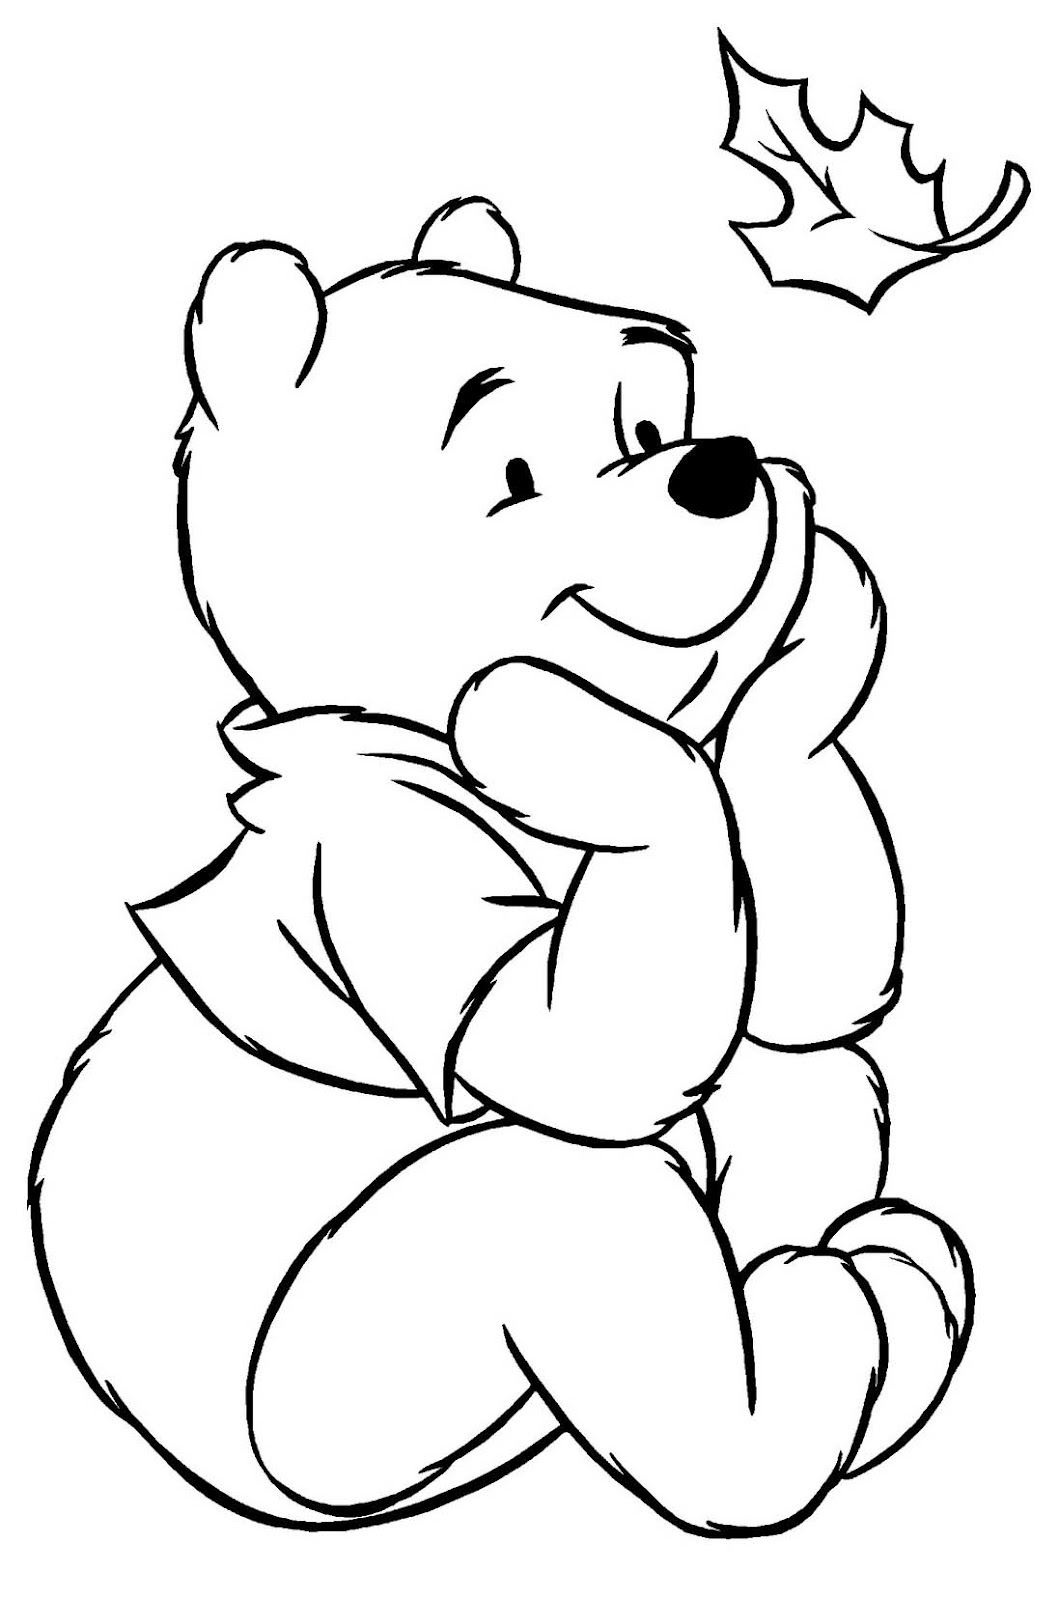 Disney Animal Winnie The Pooh Characters Coloring Pages